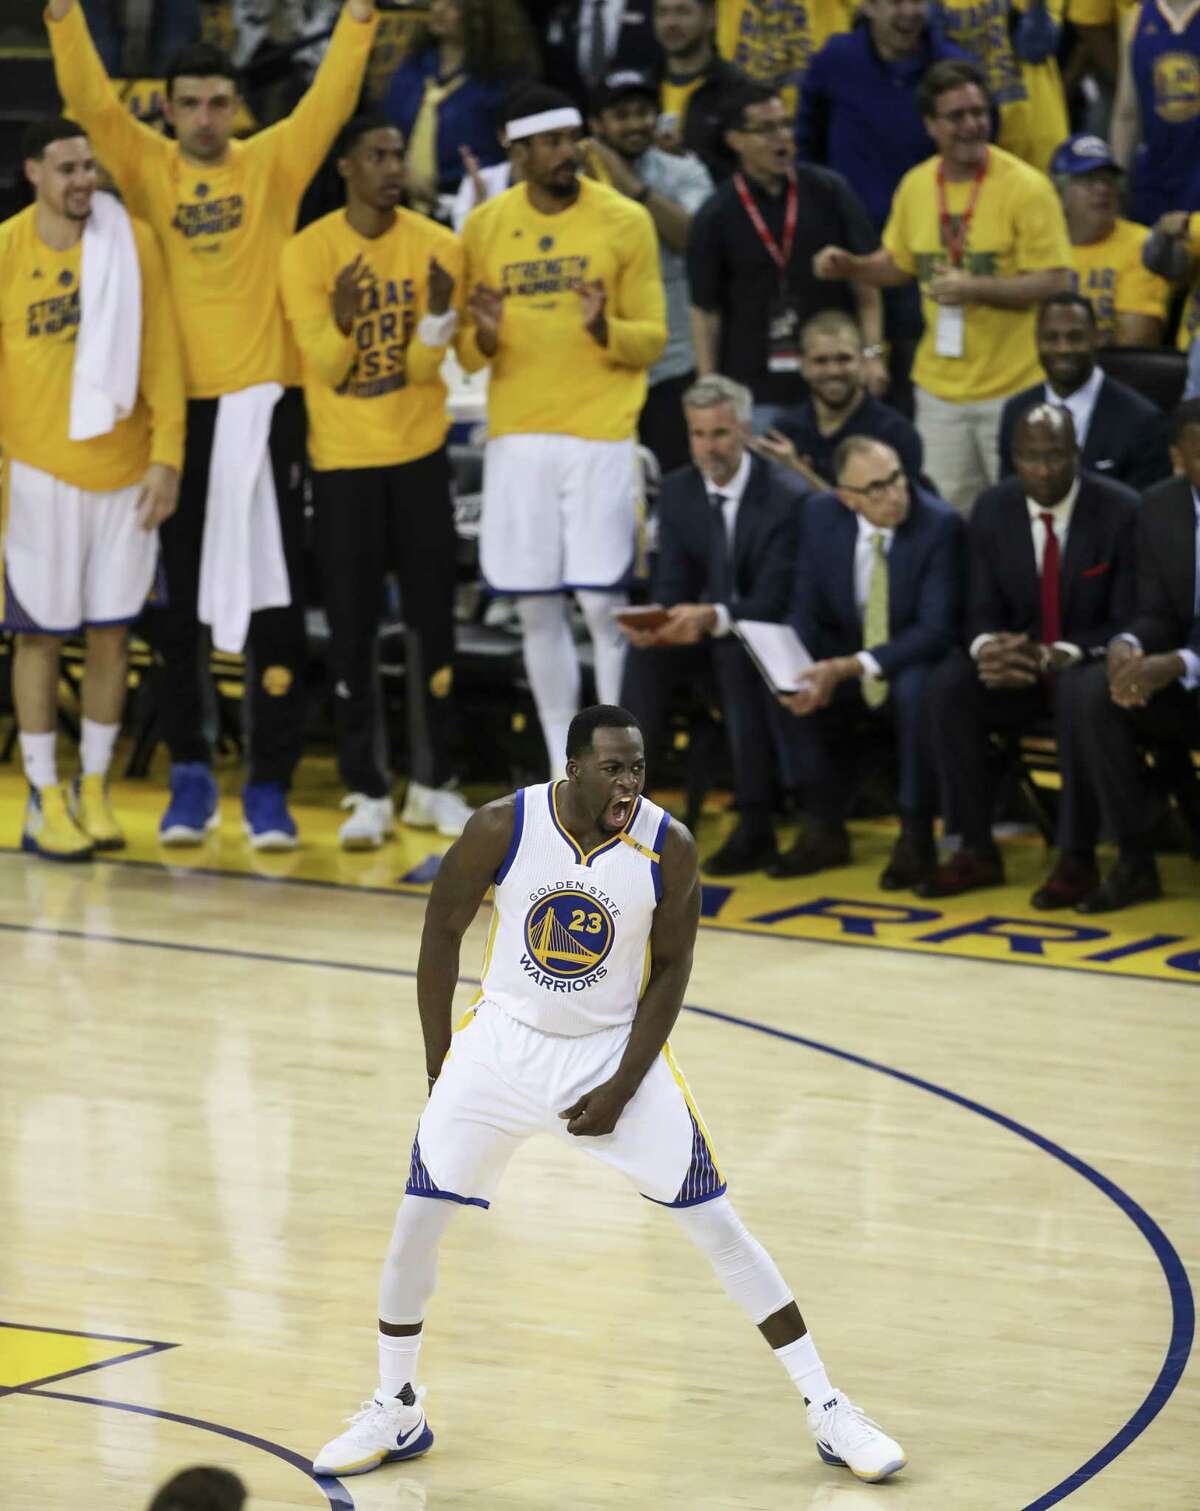 Golden State Warriors' Draymond Green reacts after hitting a three-pointer in the first quarter during Game 2 of the Western Conference Semifinals 2017 NBA Playoffs at Oracle Arena on Thursday, May 4, 2017 in Oakland, Calif.